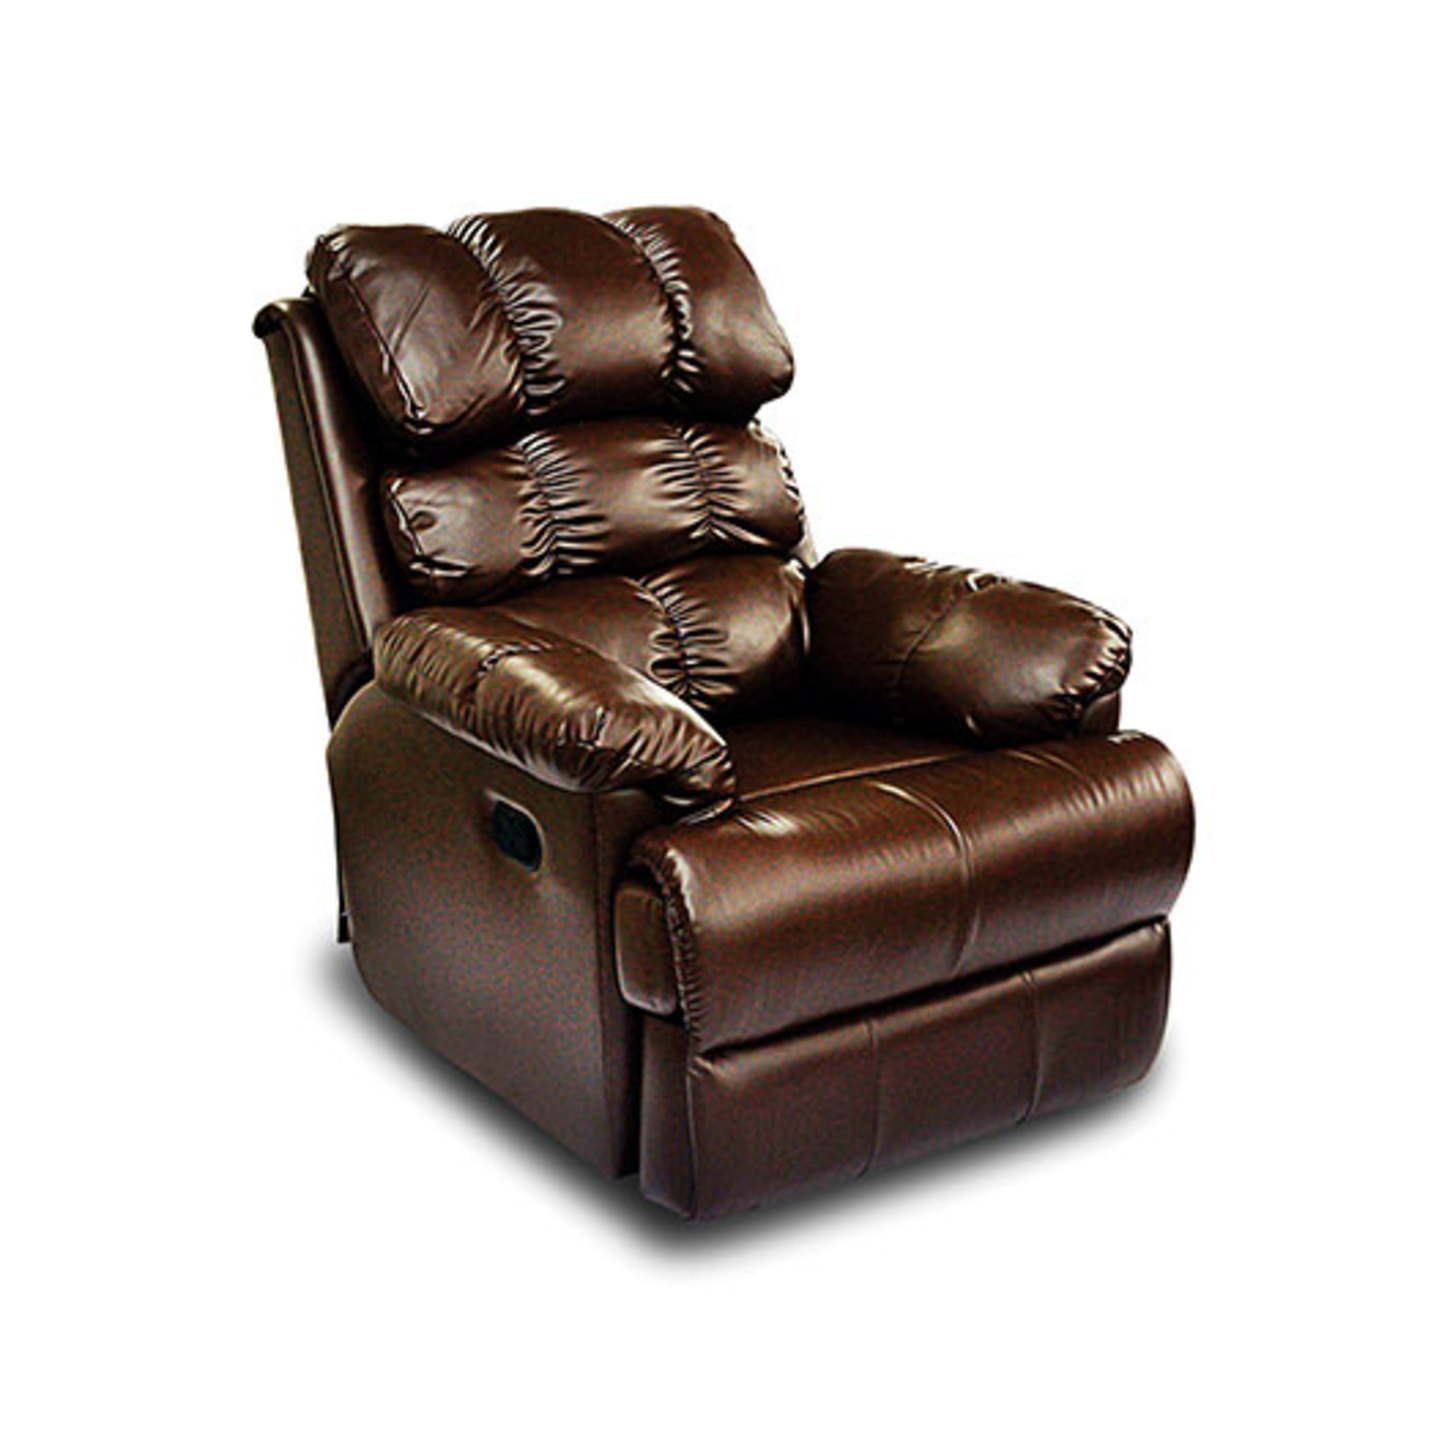 LN Recliner Chair Amet Electronic System In Brown Colour